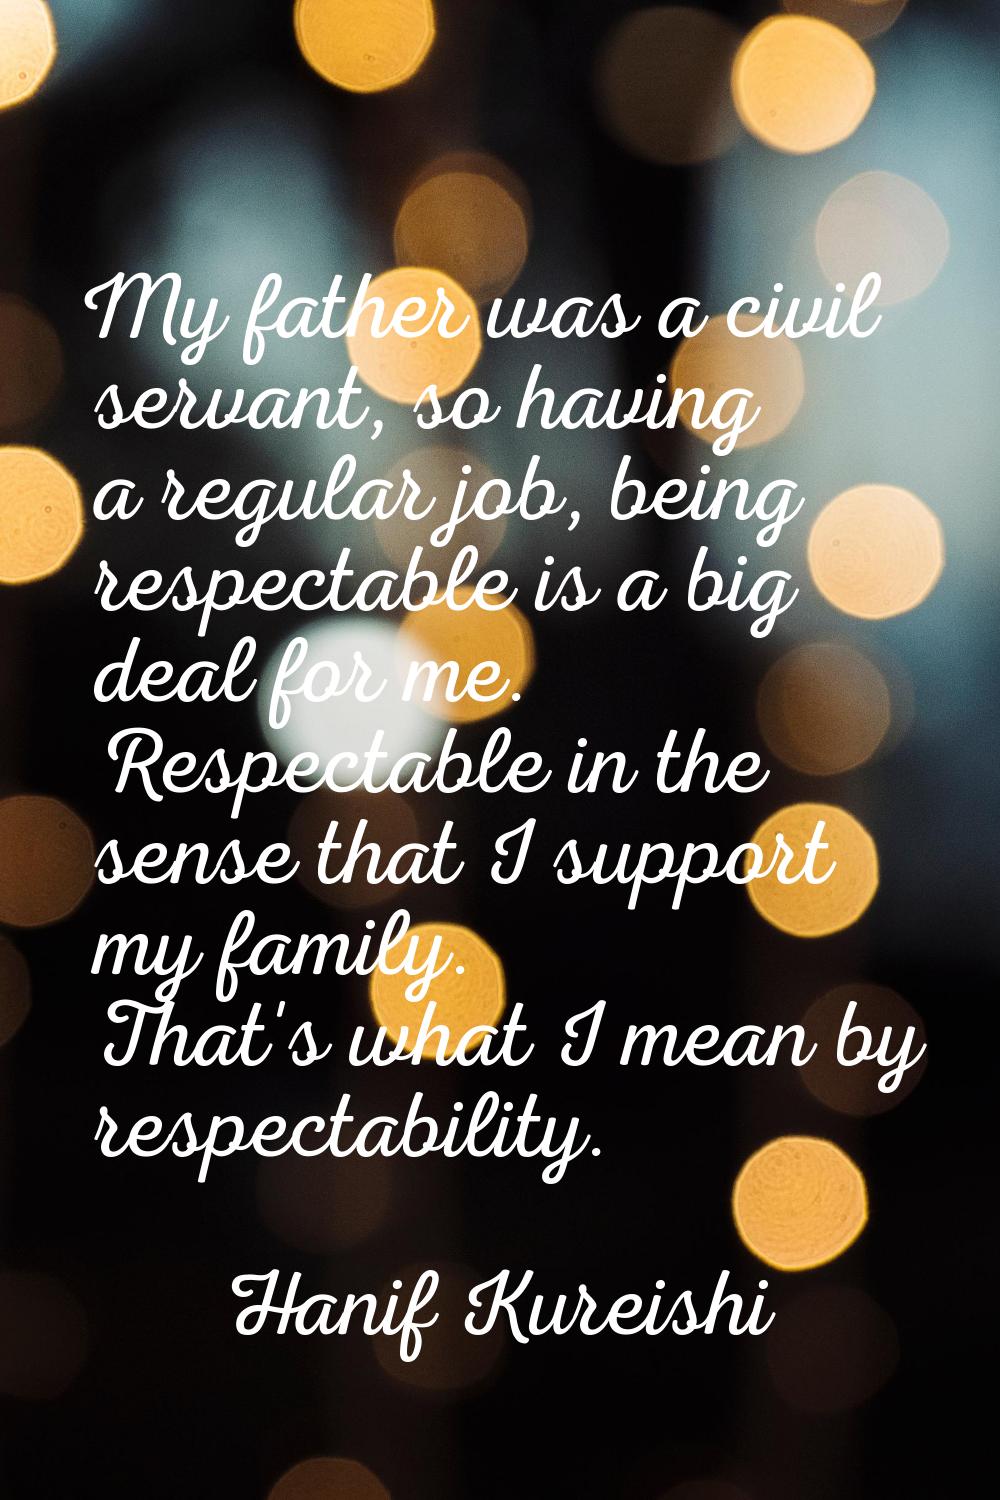 My father was a civil servant, so having a regular job, being respectable is a big deal for me. Res